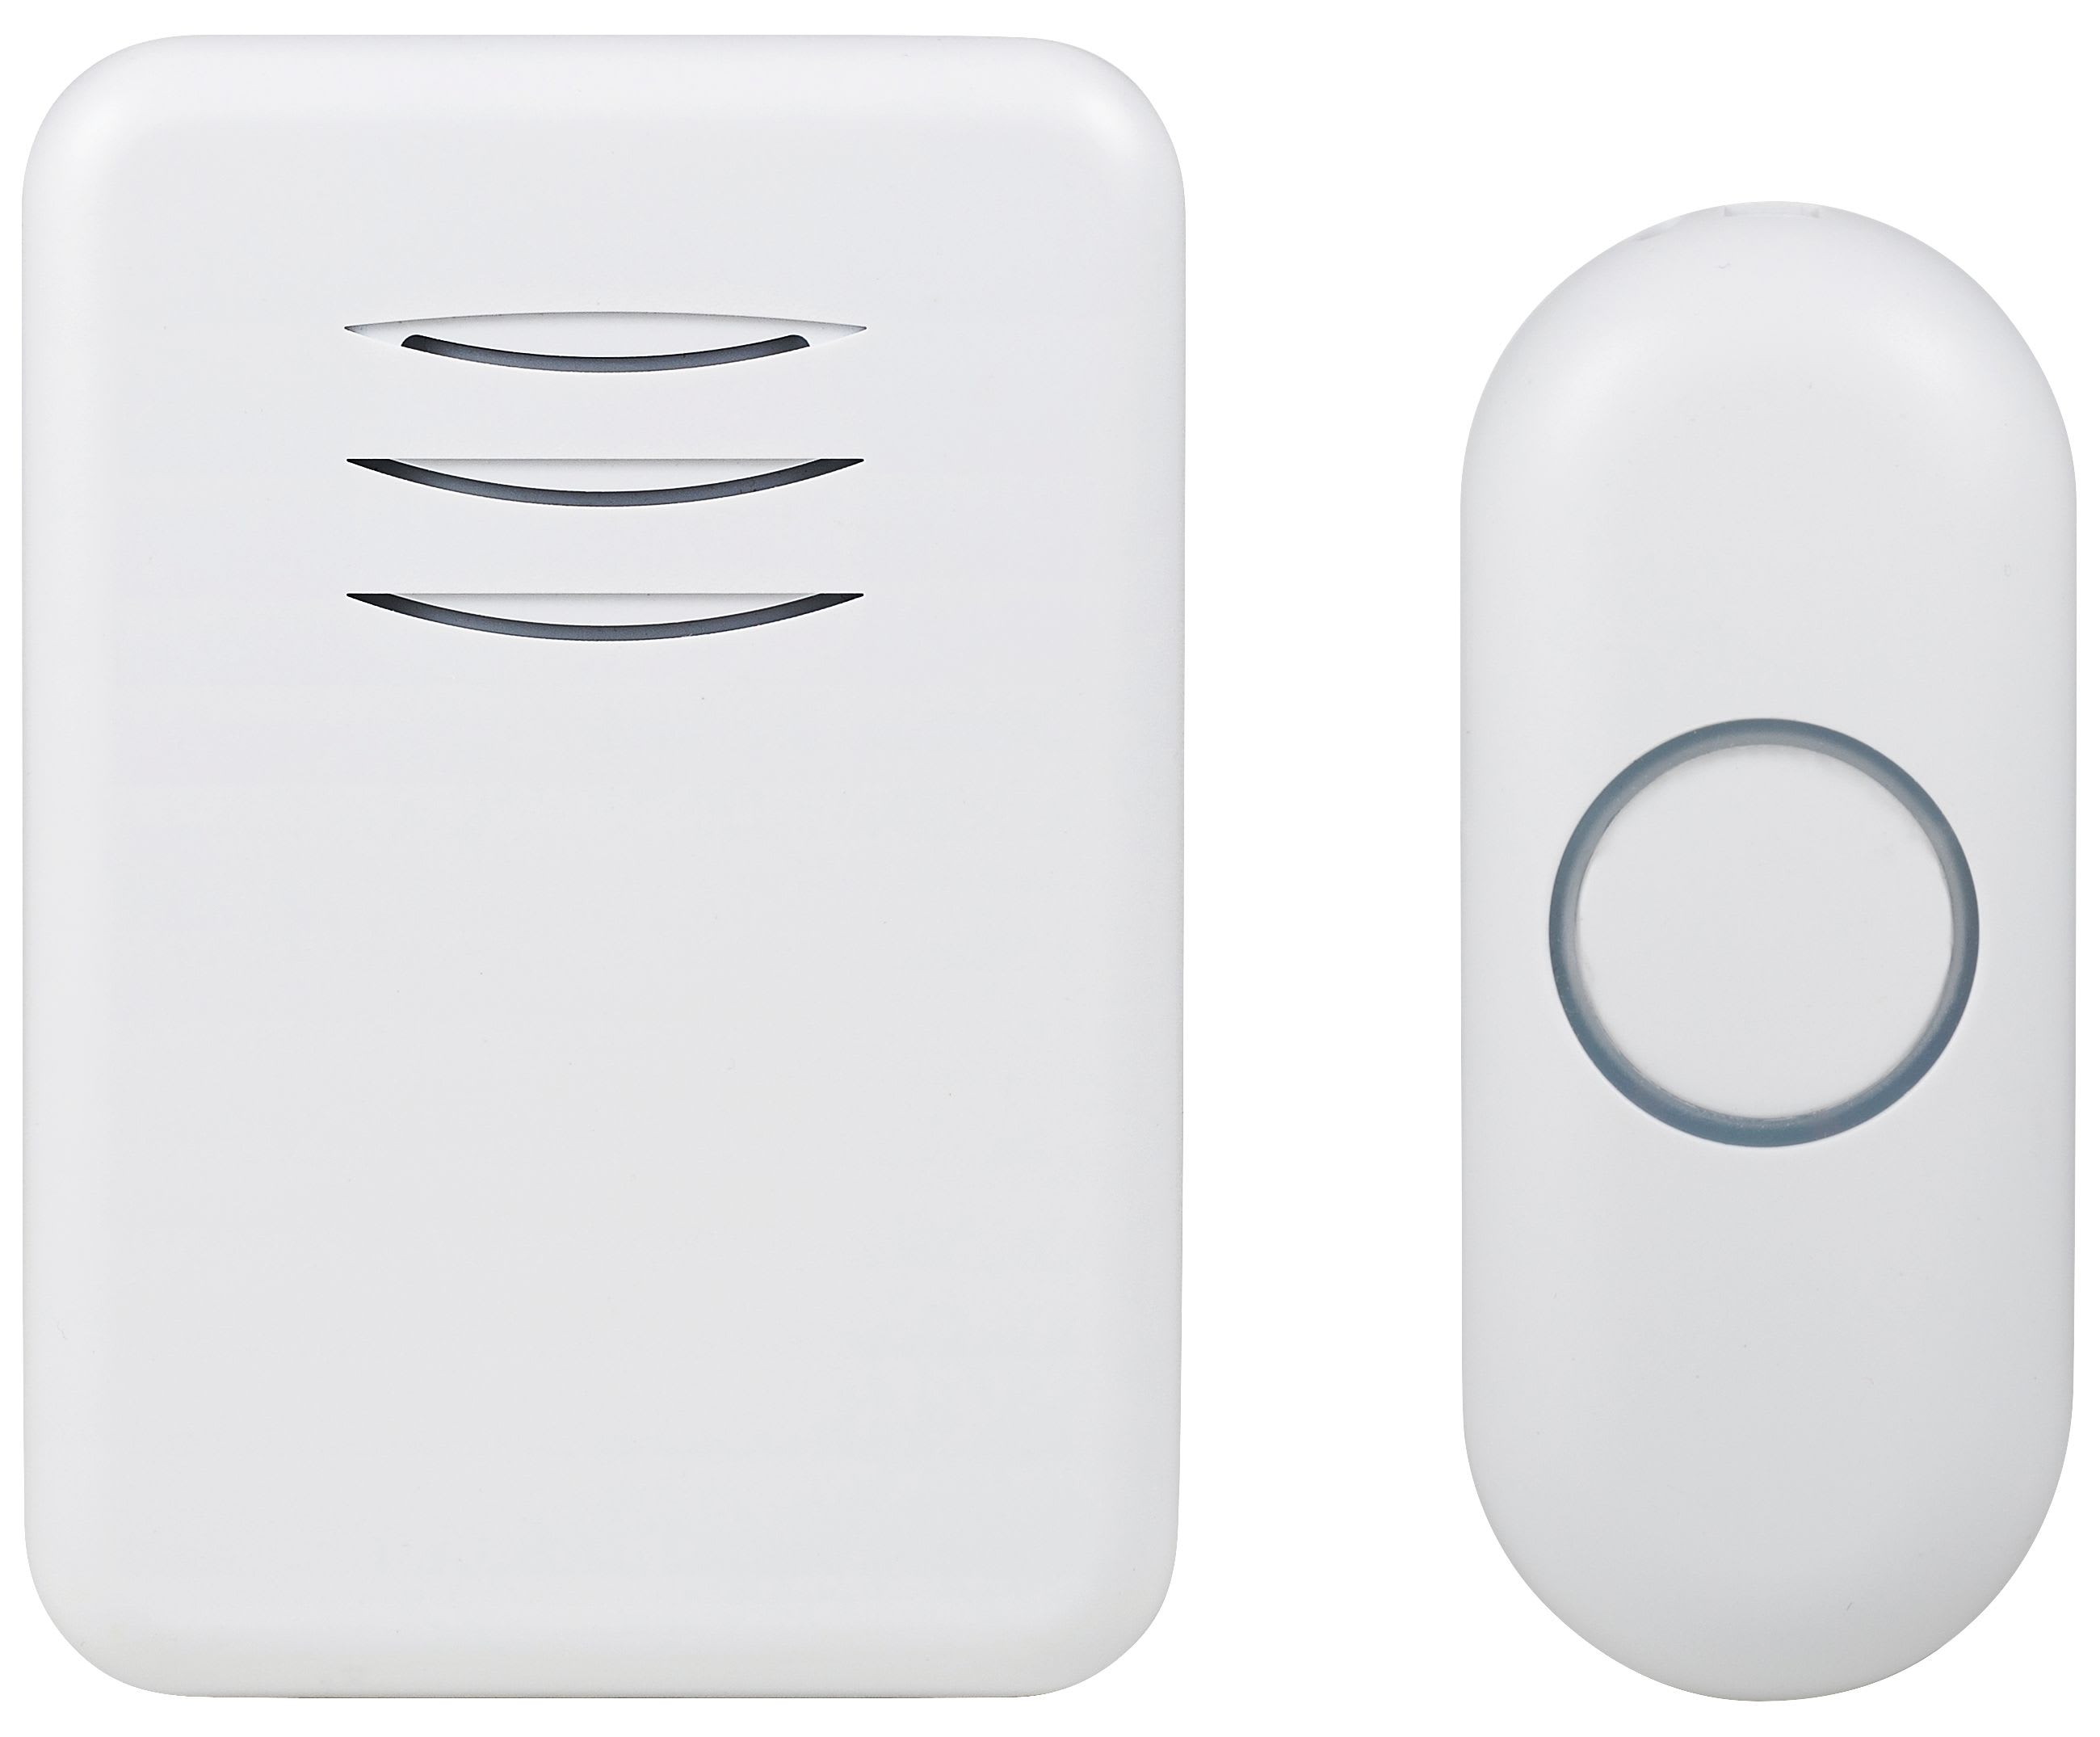 Byron DBY-22311 Wireless Doorbell with Portable Chime -